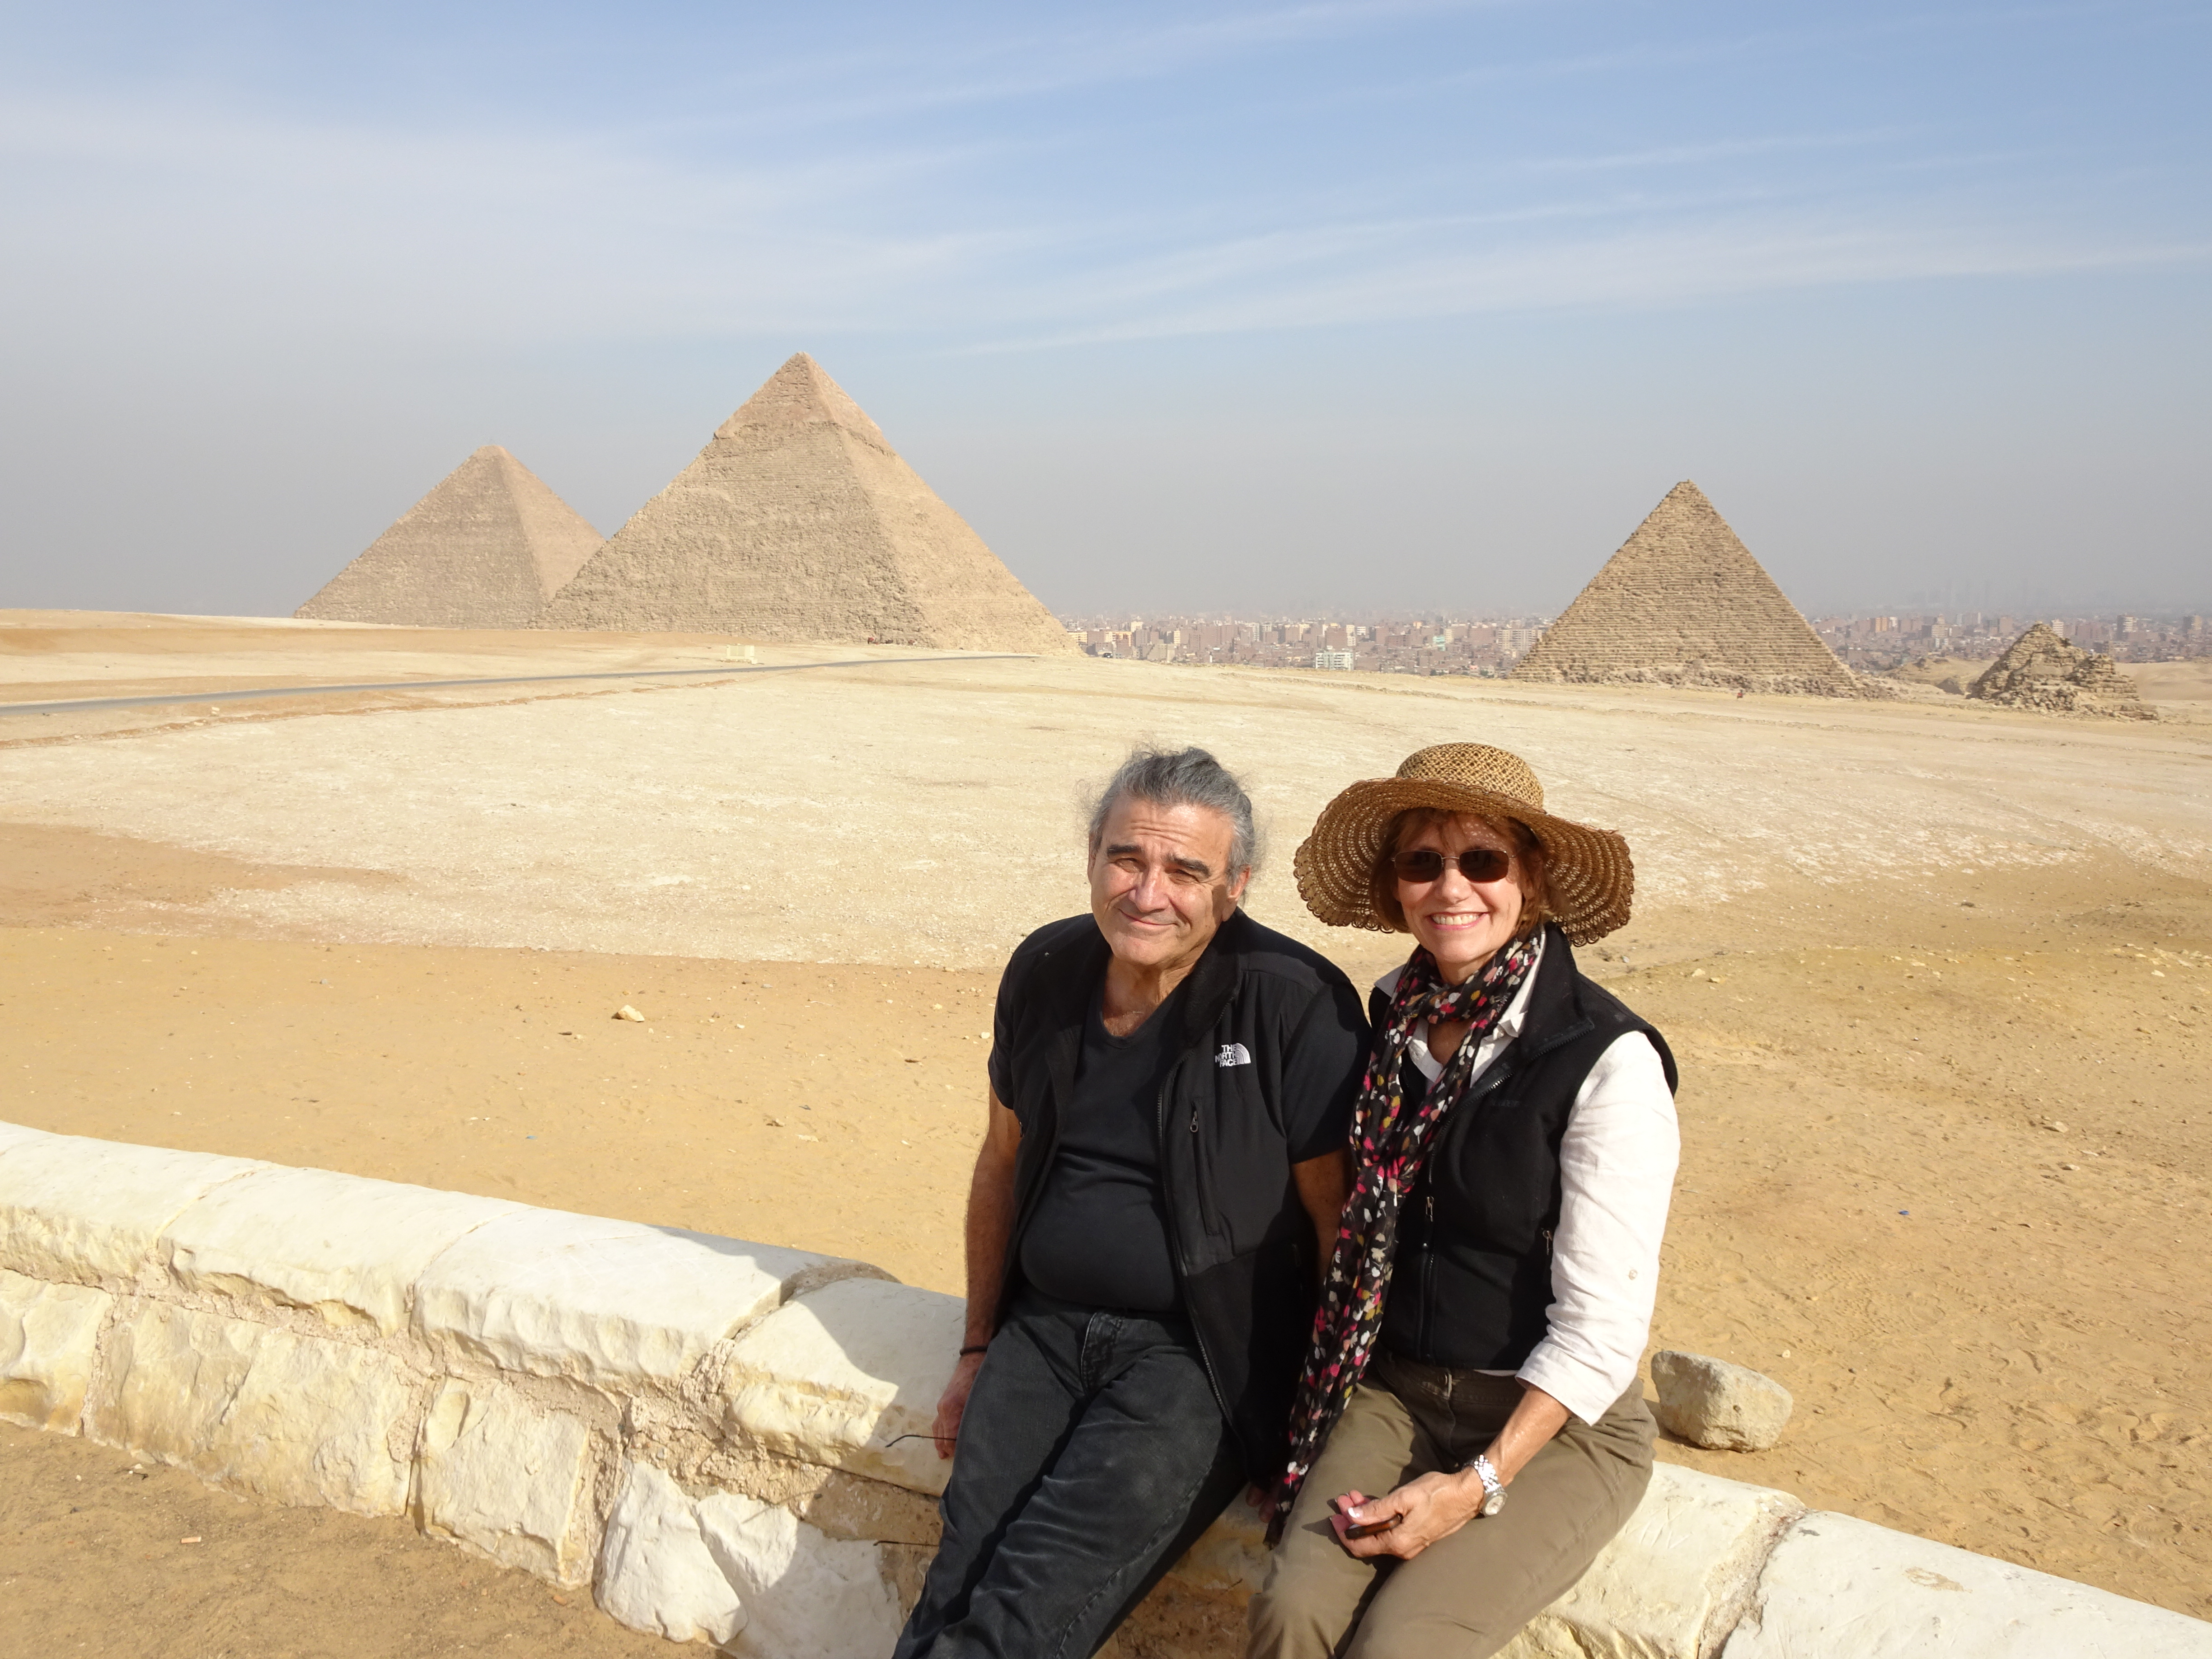 Debby and I in front of the pyramids